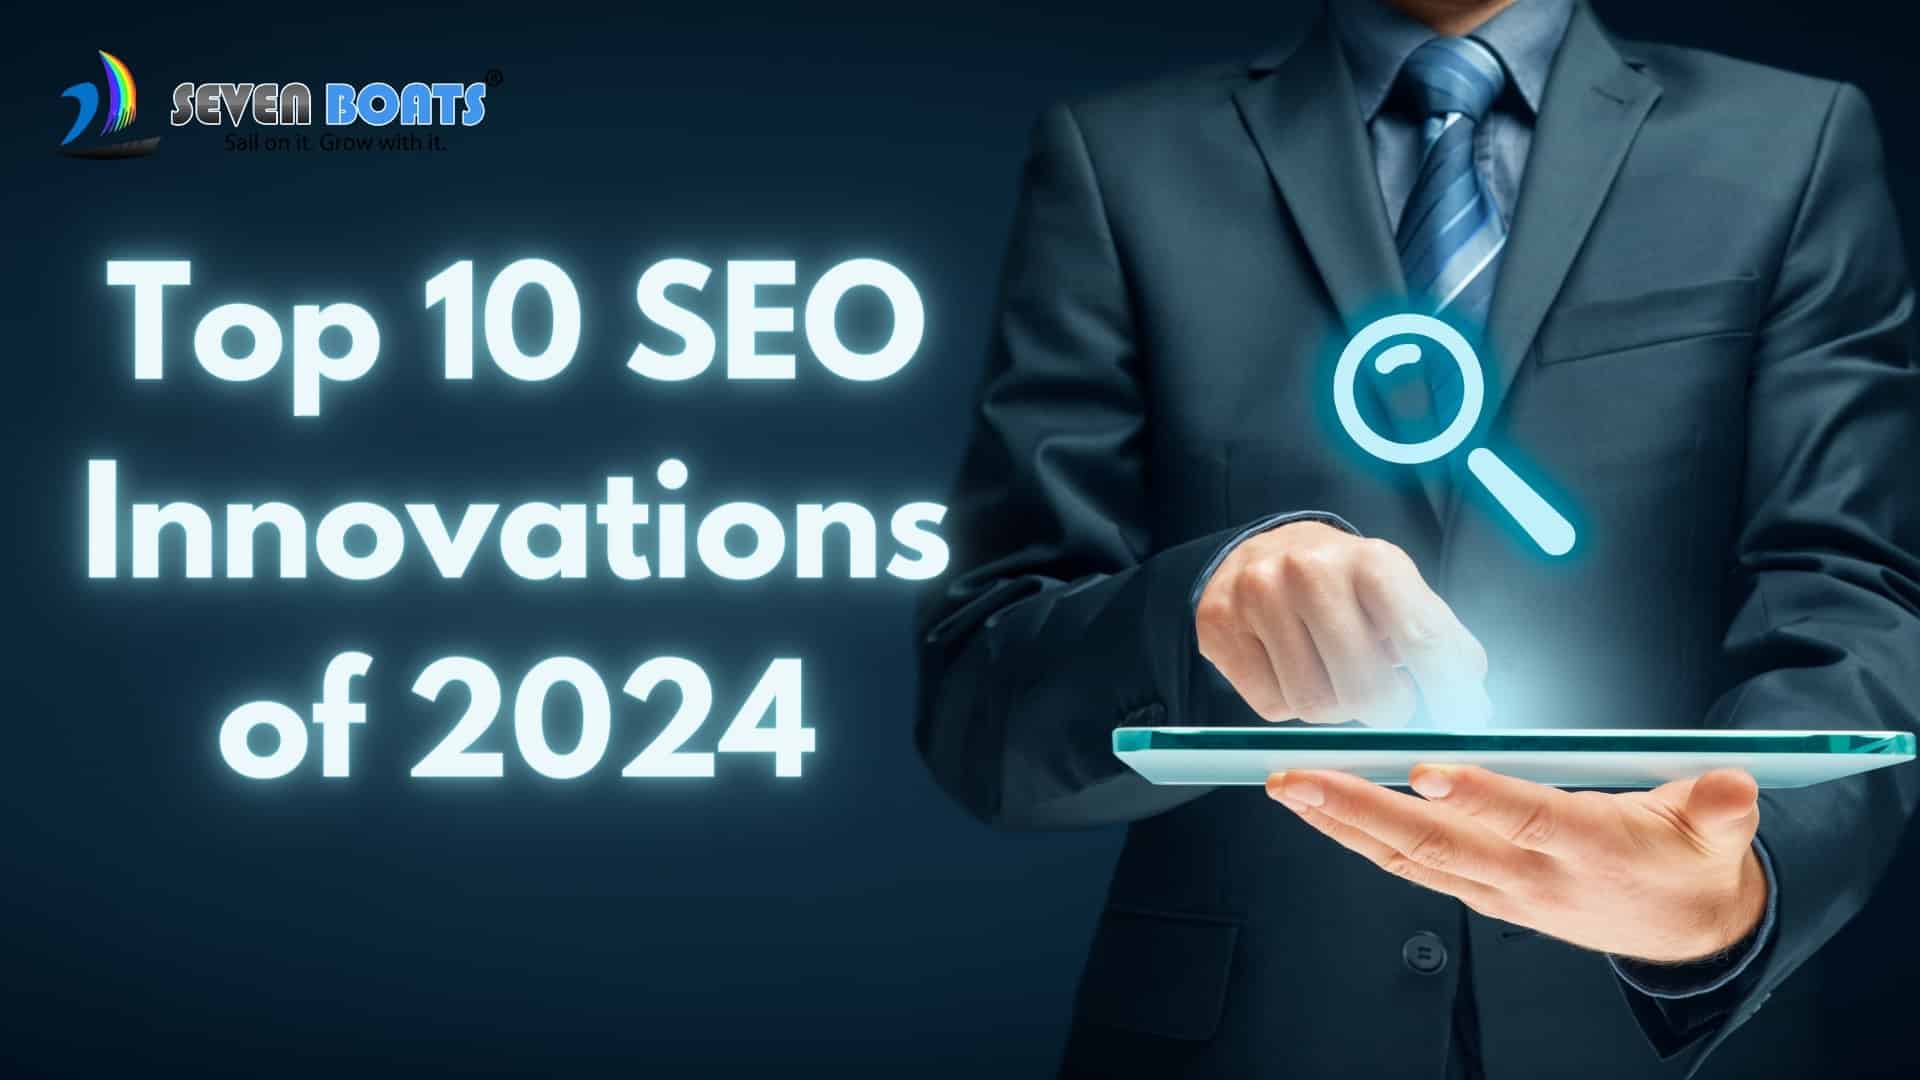 Top 10 SEO Innovations of 2024